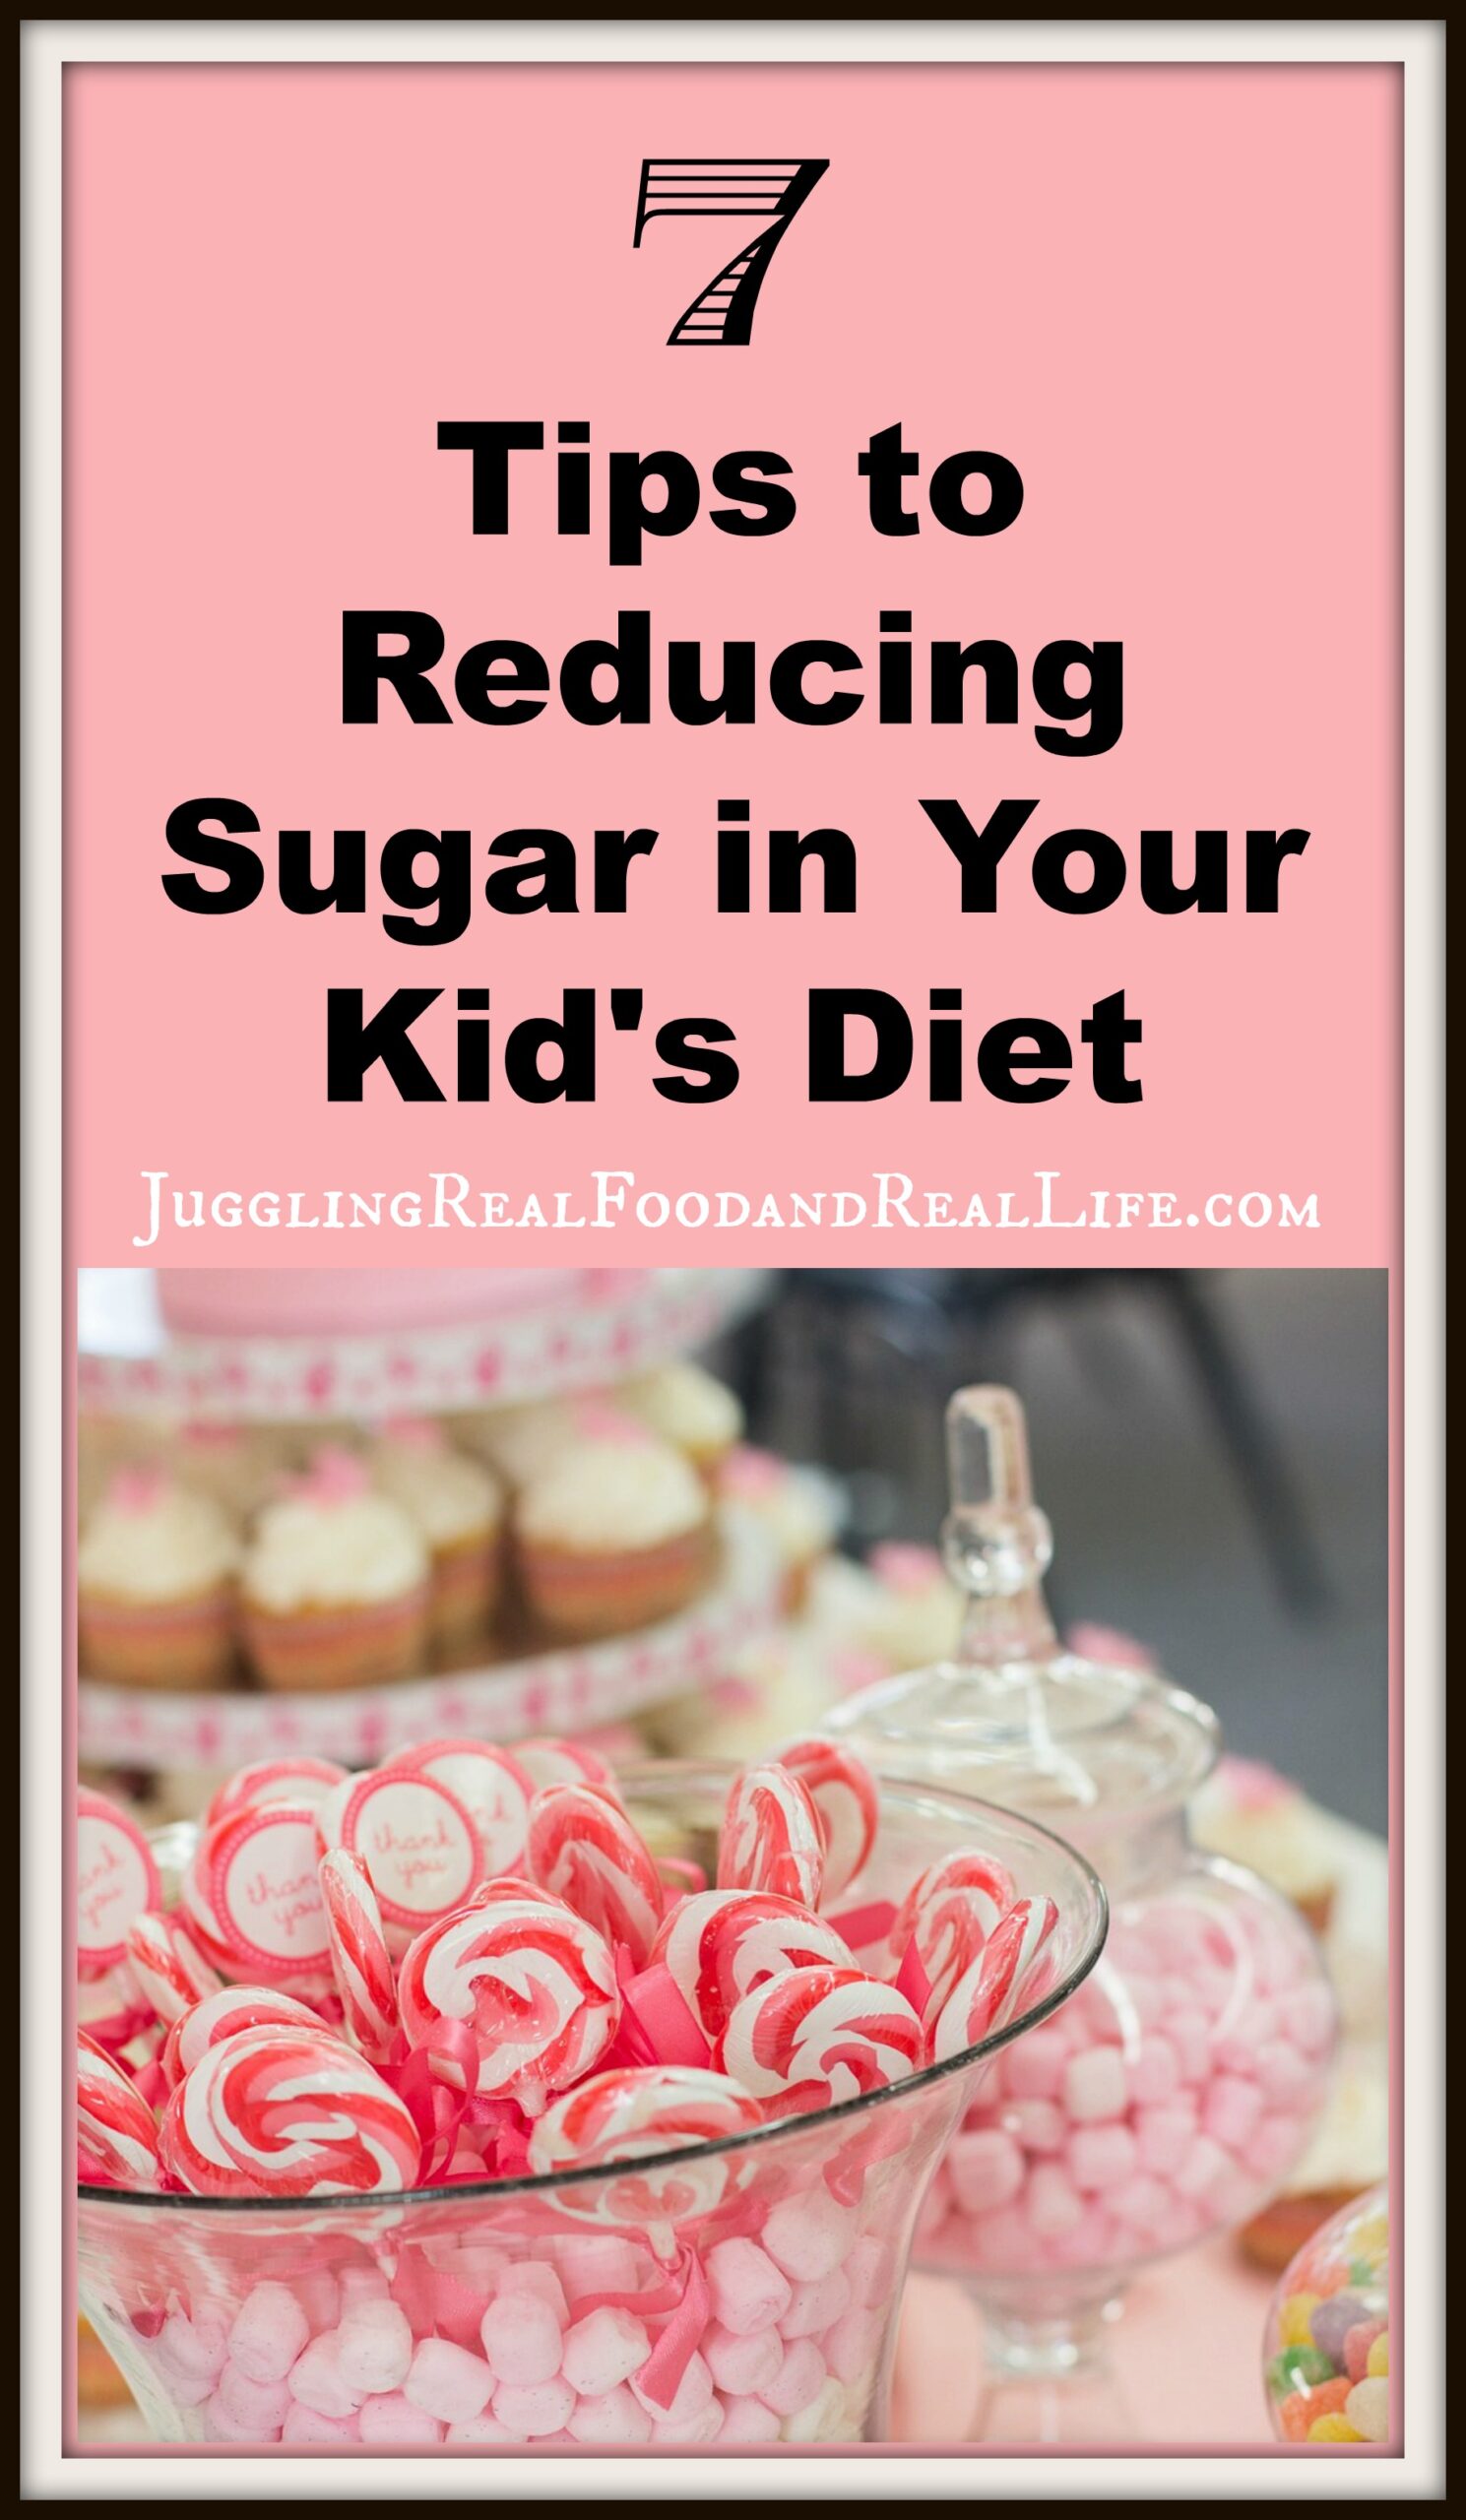 7 Tips To Reducing Sugar in Your Kid’s Diet – Juggling Real Food and Real Life